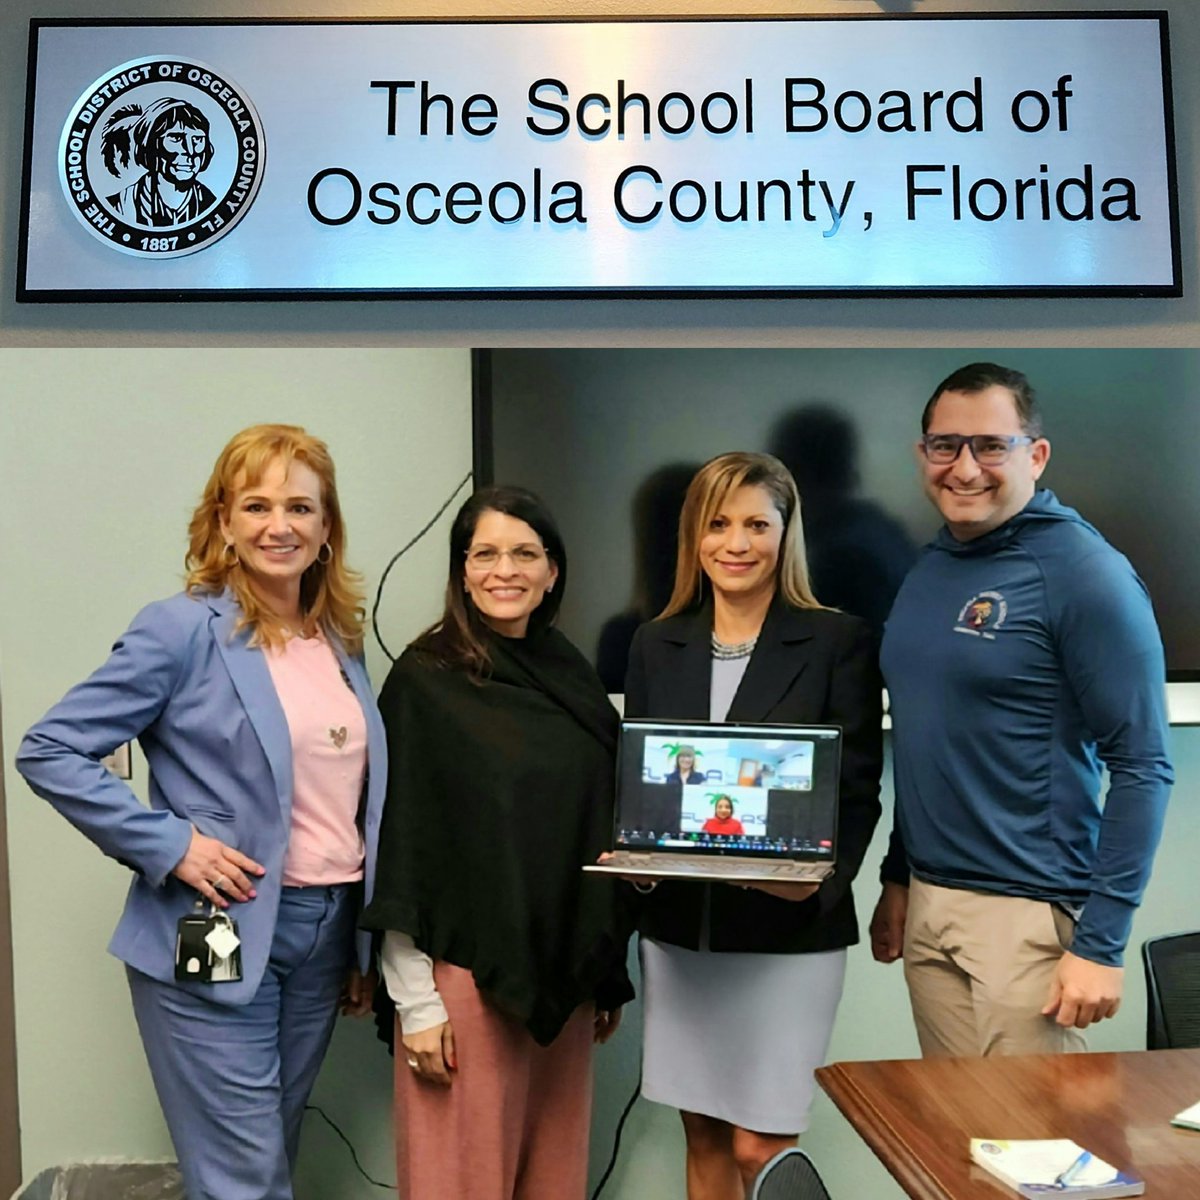 What a meaningful discussion with Superintendent @DrMarkShanoff of @Osceolaschools, around making diversity a priority and enlarging the pipeline of potential candidates for leadership. Welcome, Dr. Shanoff to our @Florida_ALAS familia, we look forward to collaborating with you.